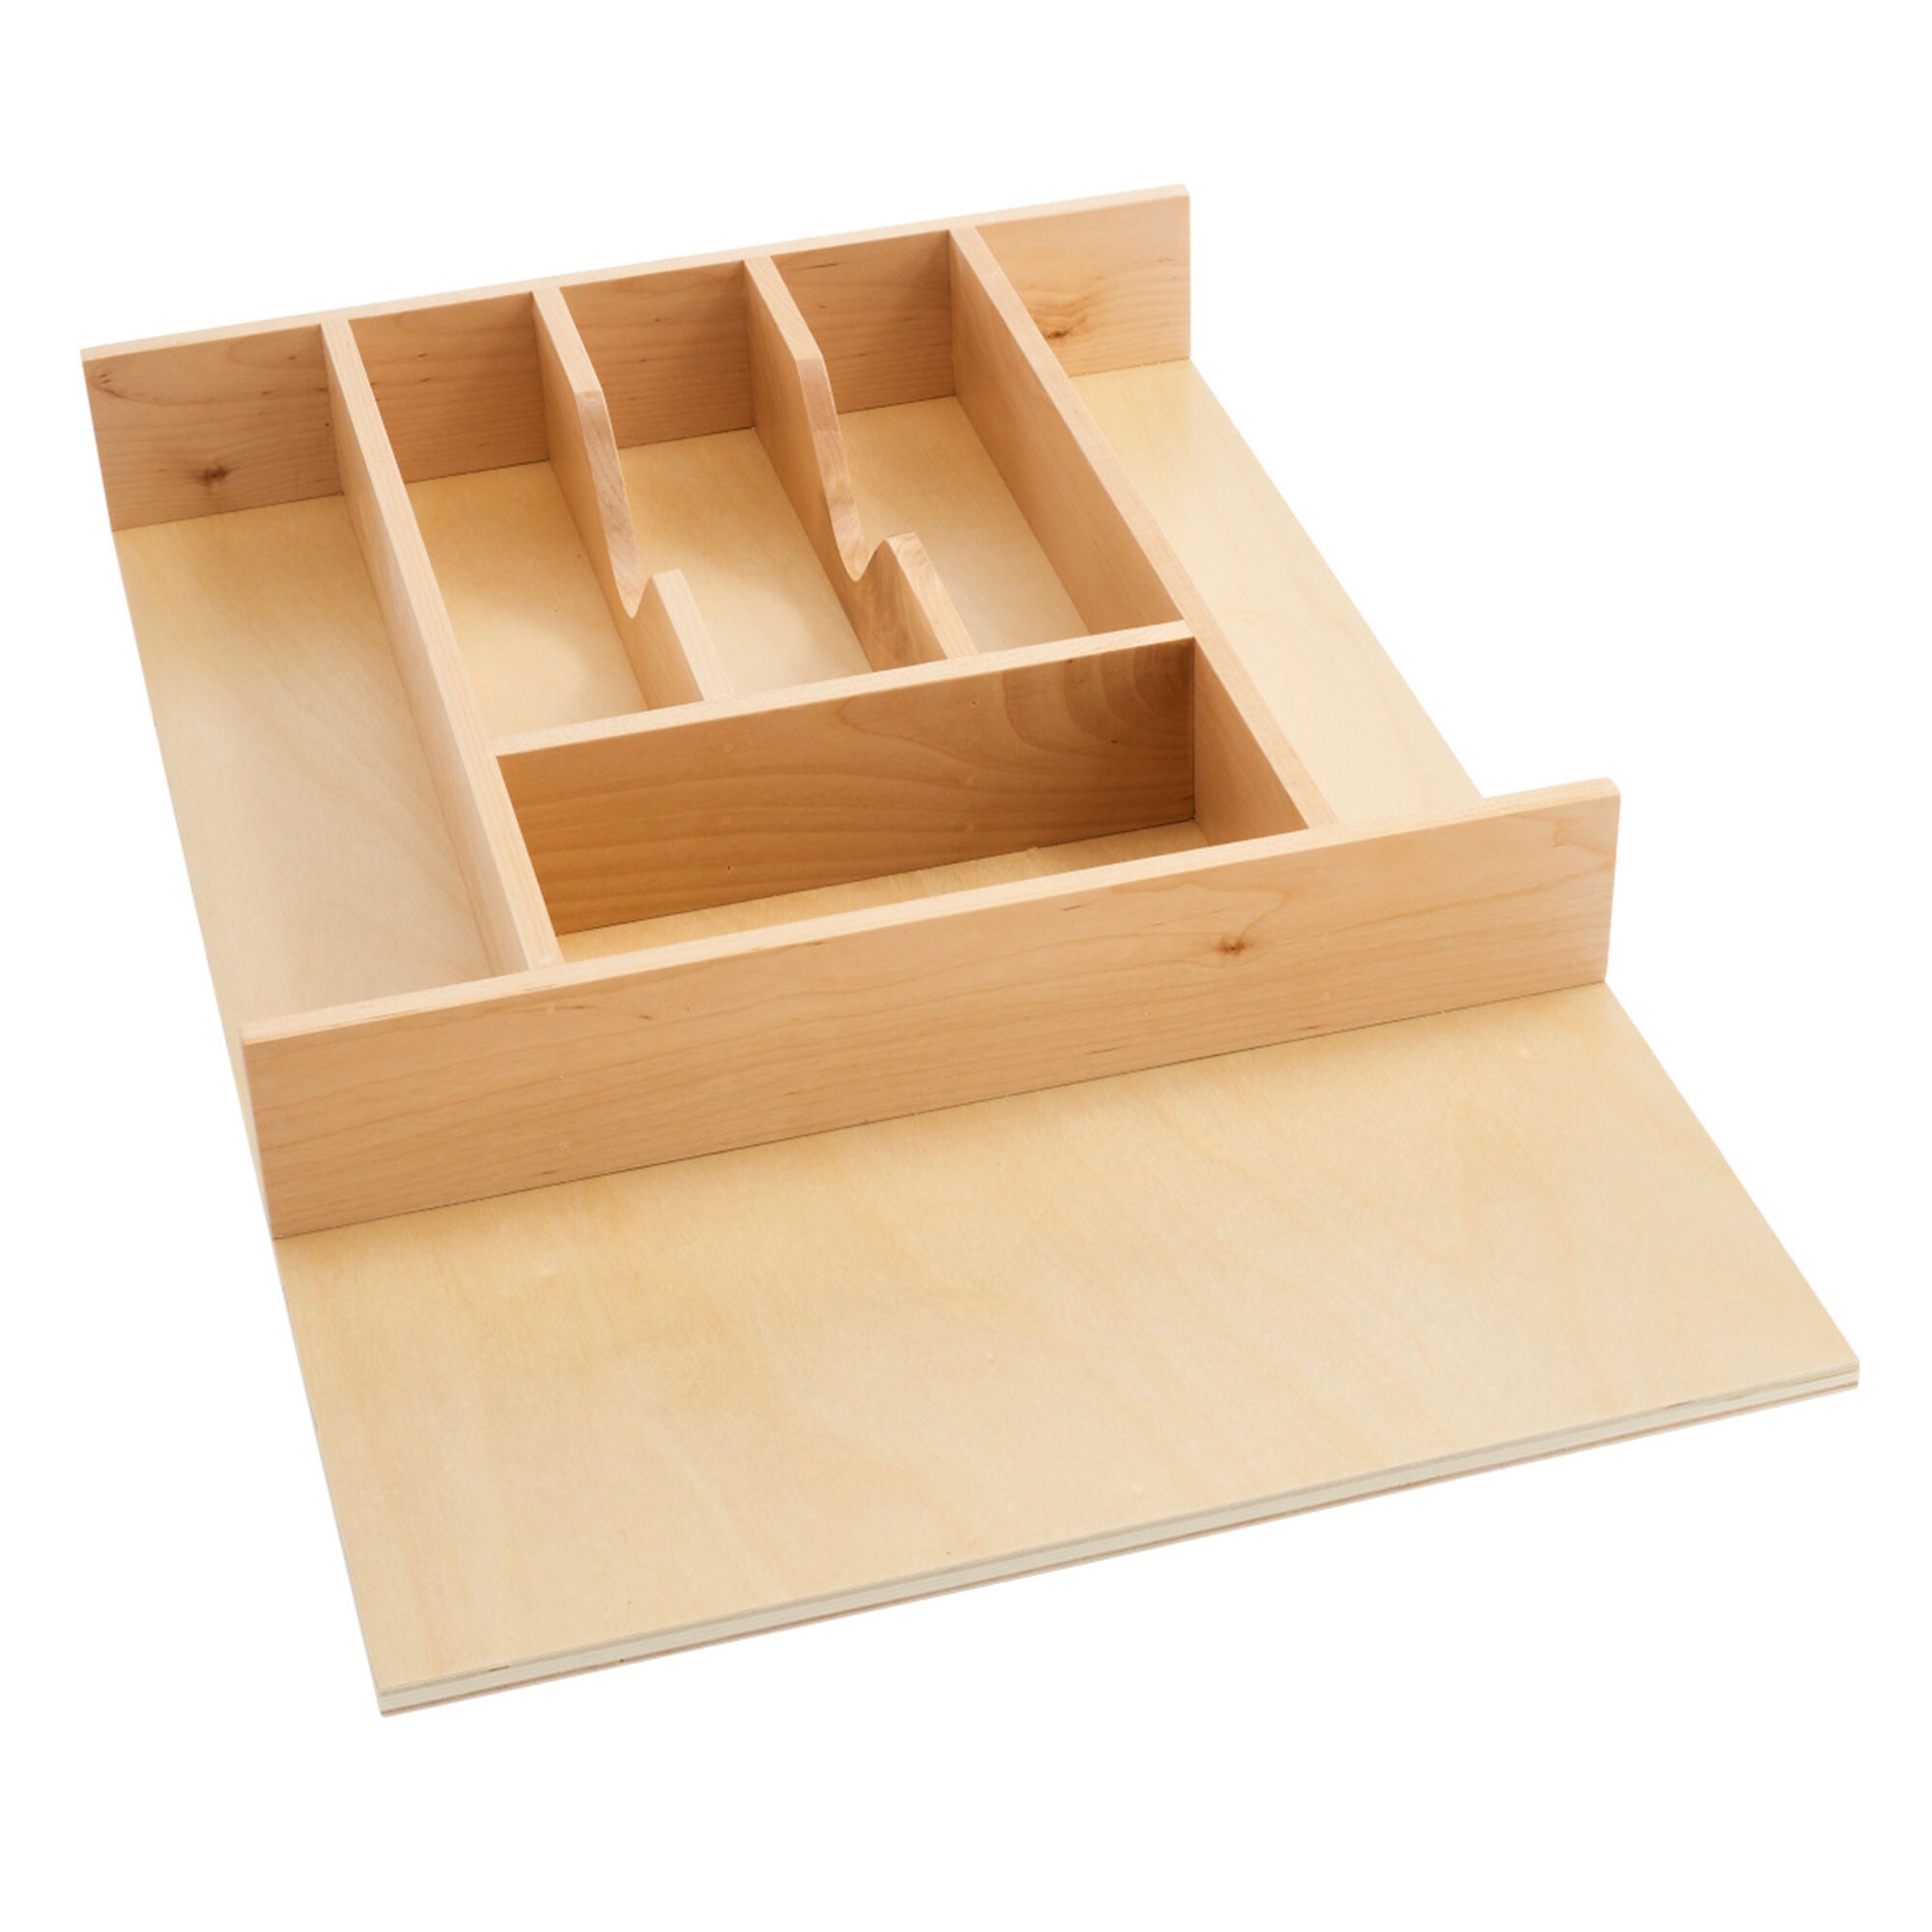 Surfaces 10.4375-in W x 0.75-in H x 10.5-in D Natural Birch Stained Cabinet  Shelf Kit